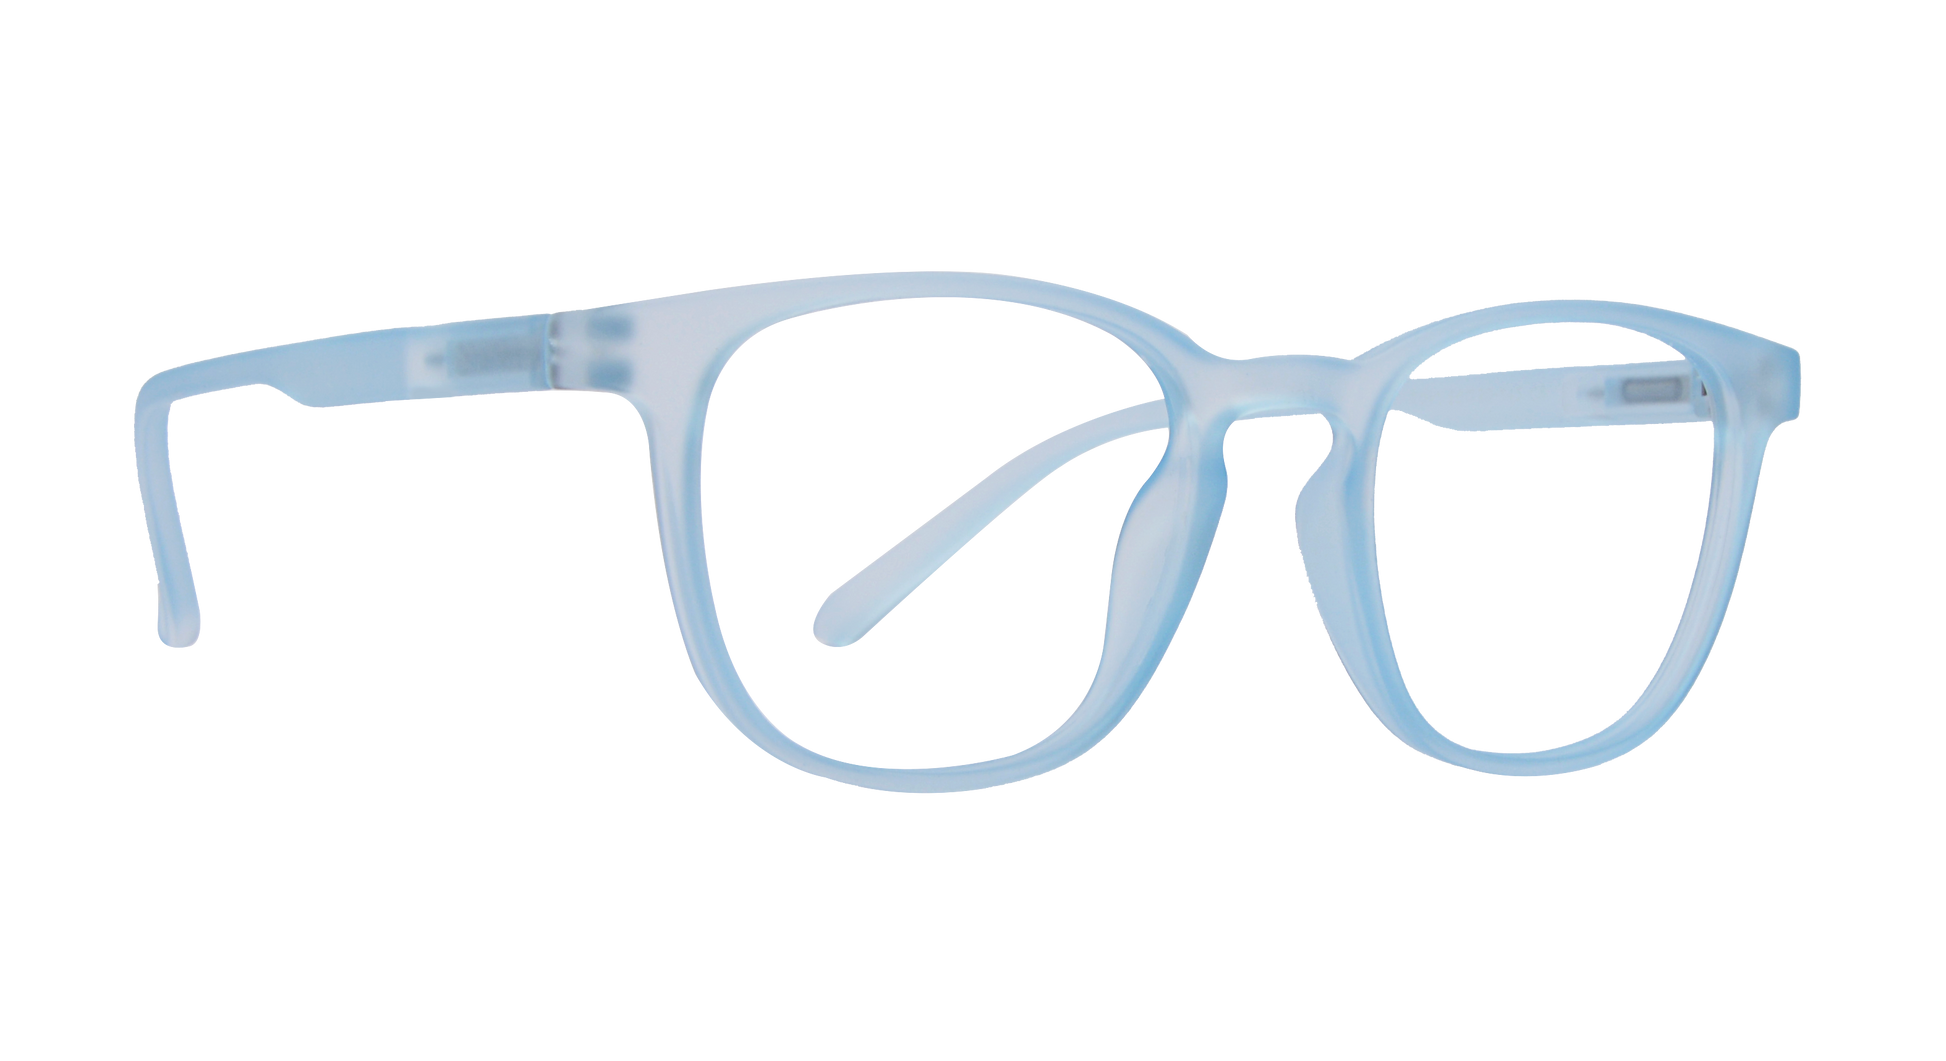 A sleek, modern look is conveyed in this clinically minimalist photograph of a pair of eyeglasses. The glasses feature a clear, frameless design, and the lenses are crisp and unblemished. The background is dark and unadorned, save for the glasses themselves and a pair of blue frames visible in the lower right-hand corner, slightly out of focus. The blue frames share a similar style to the other pair, but are not in use and are slightly disheveled on the surface they rest upon.